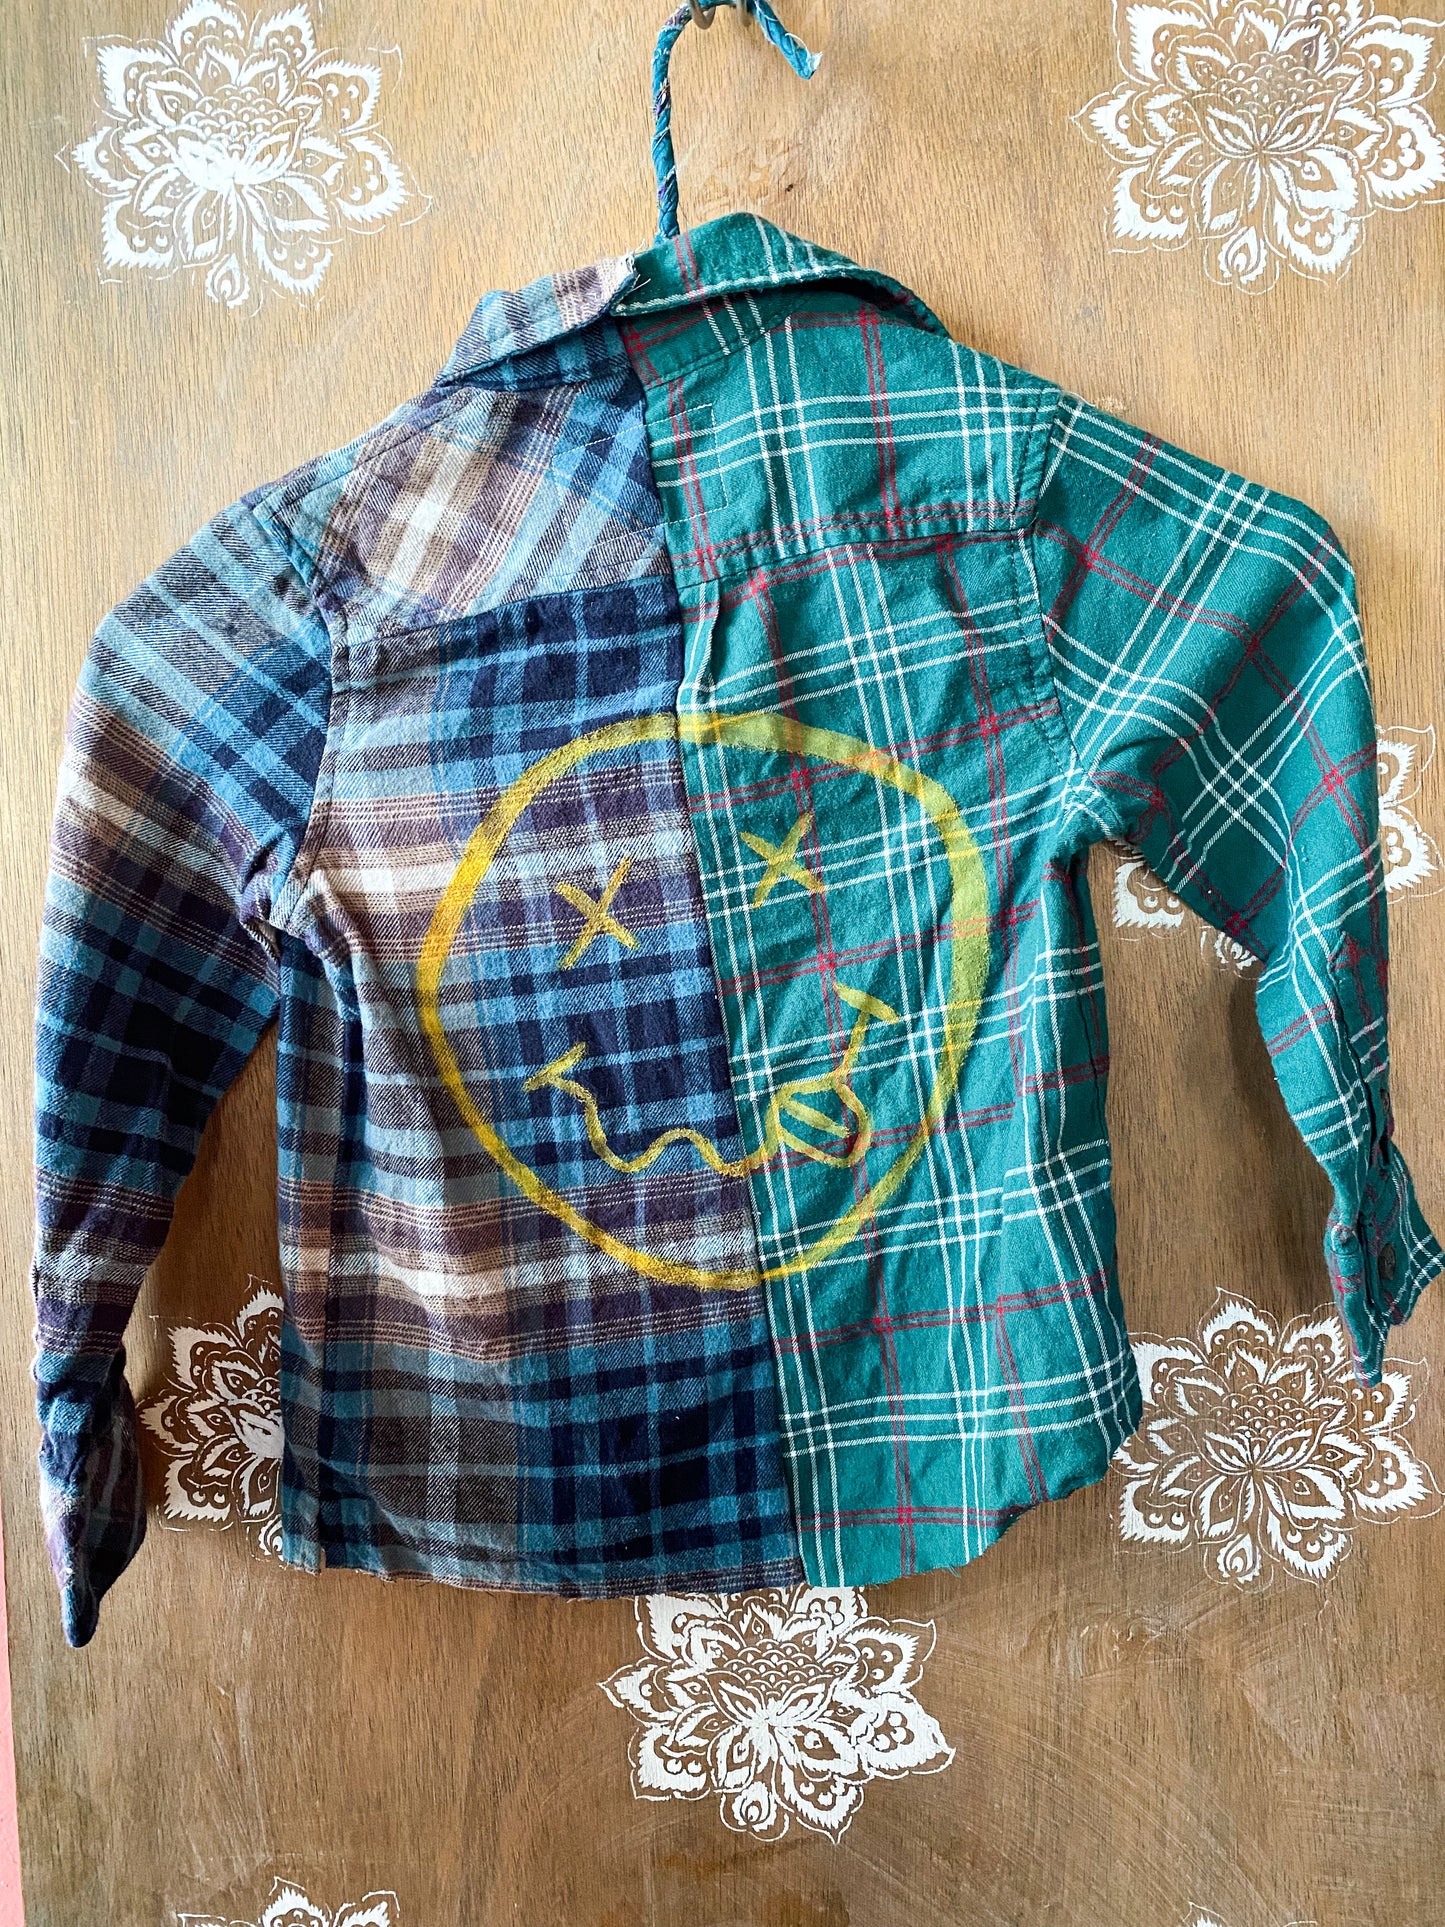 Smiley face patchwork kids upcycled plaid flannel size 4T/5T